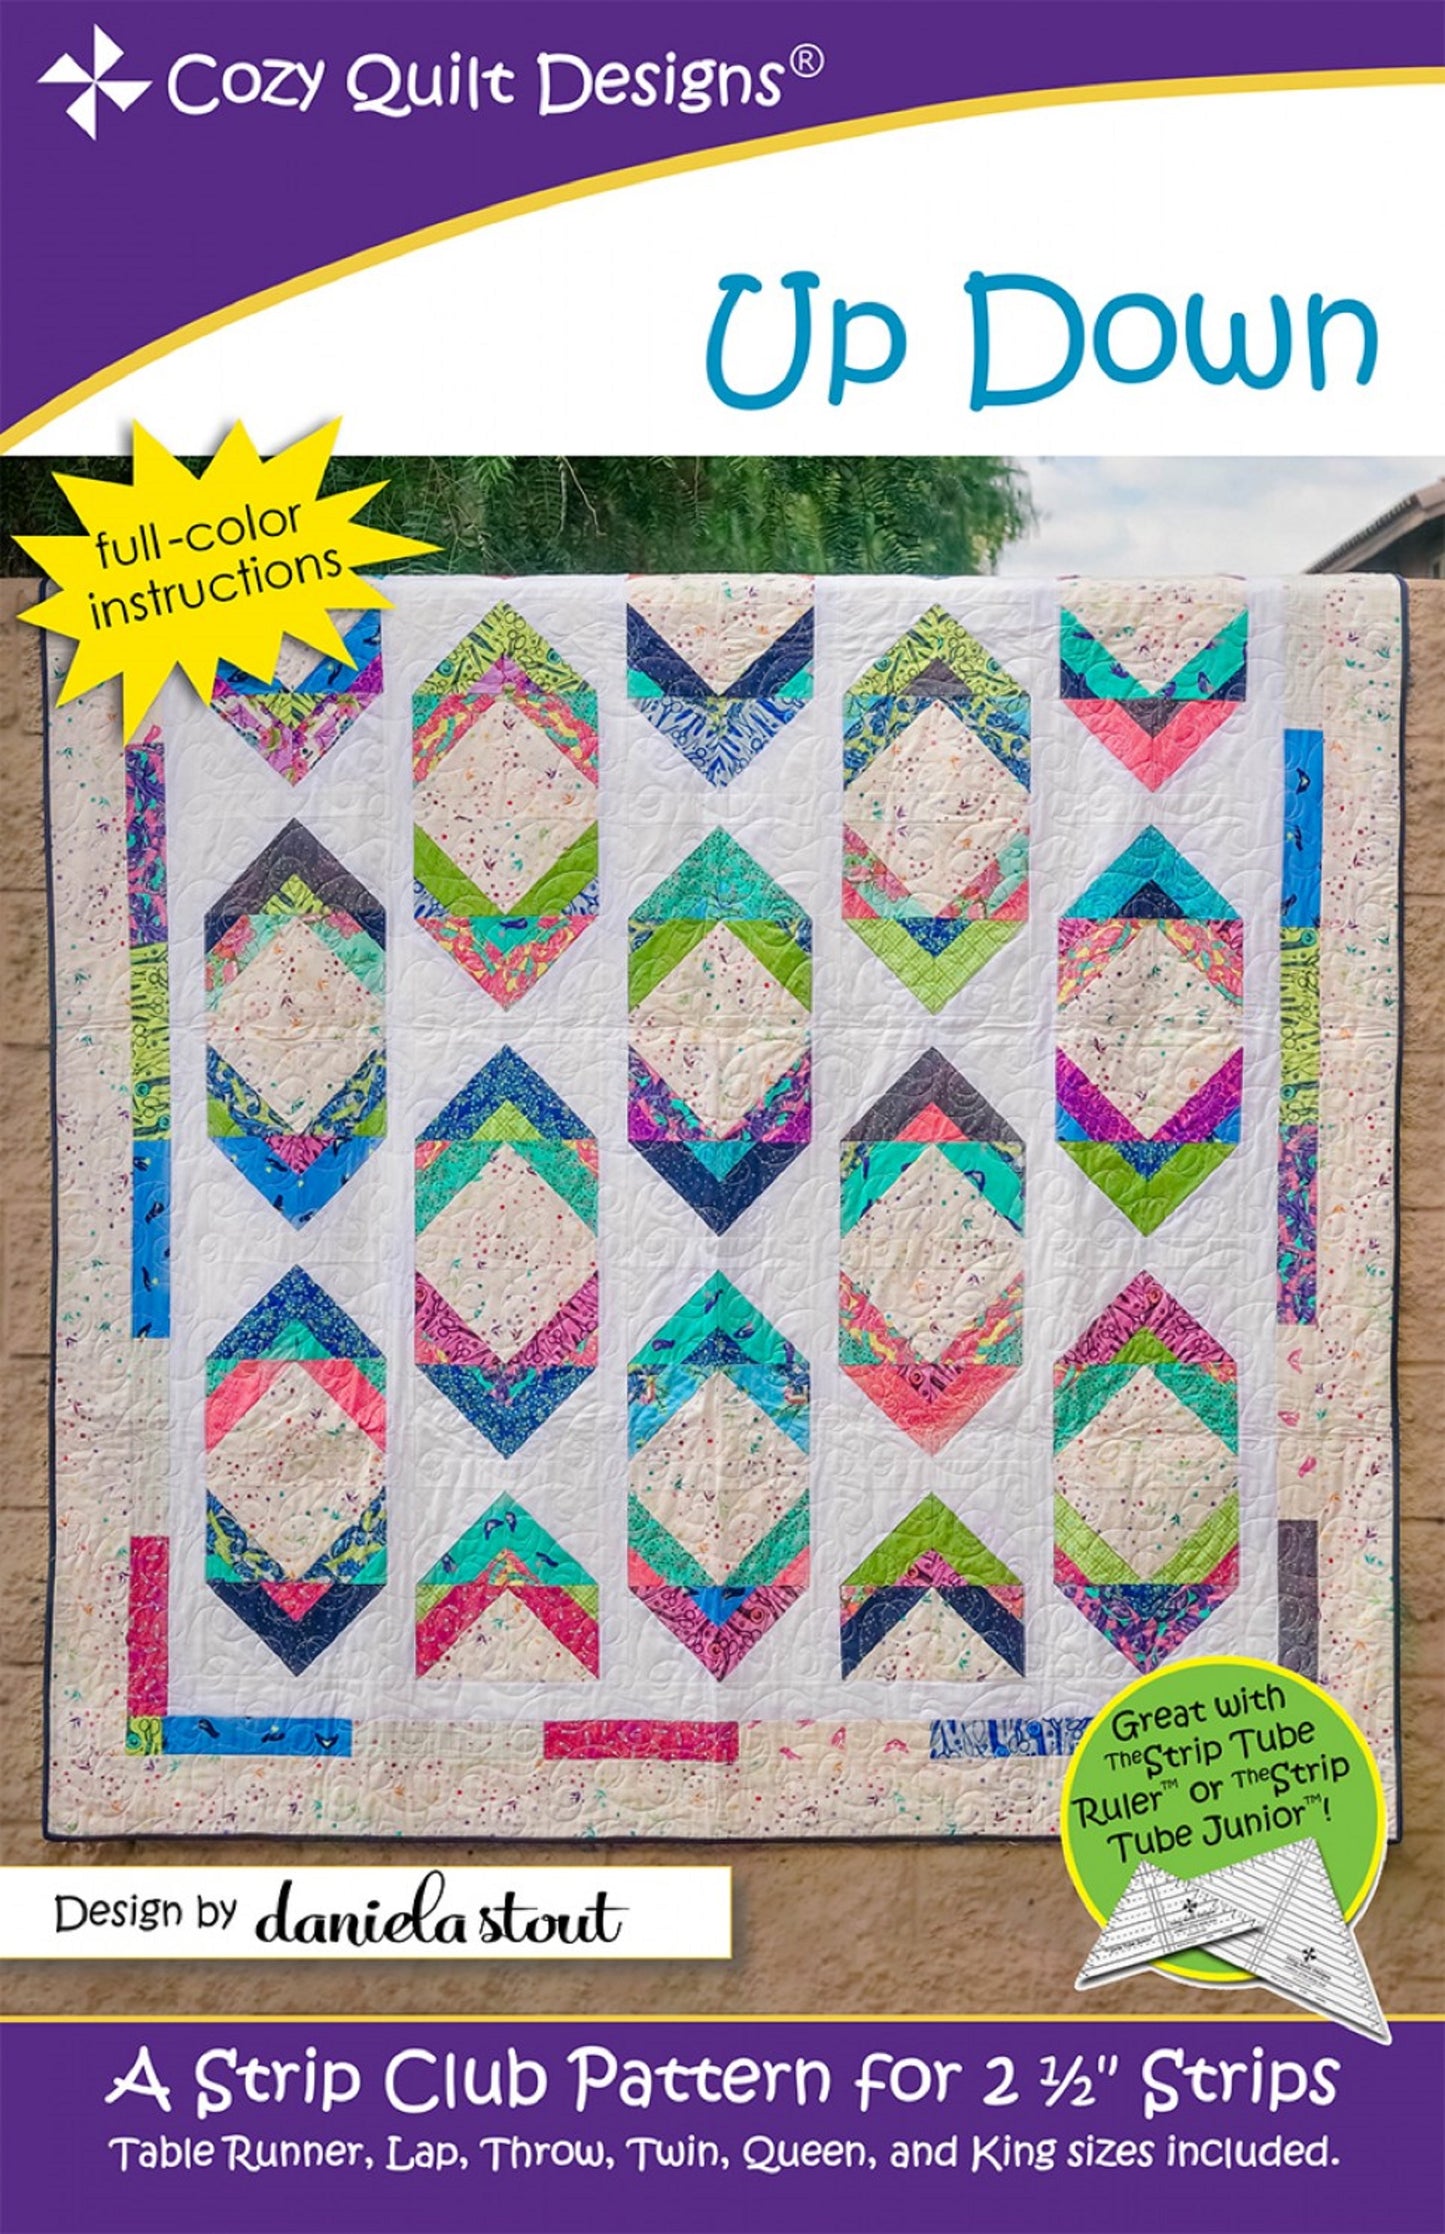 Up Down Quilt Pattern by Cozy Quilt Designs-6 Different Sizes